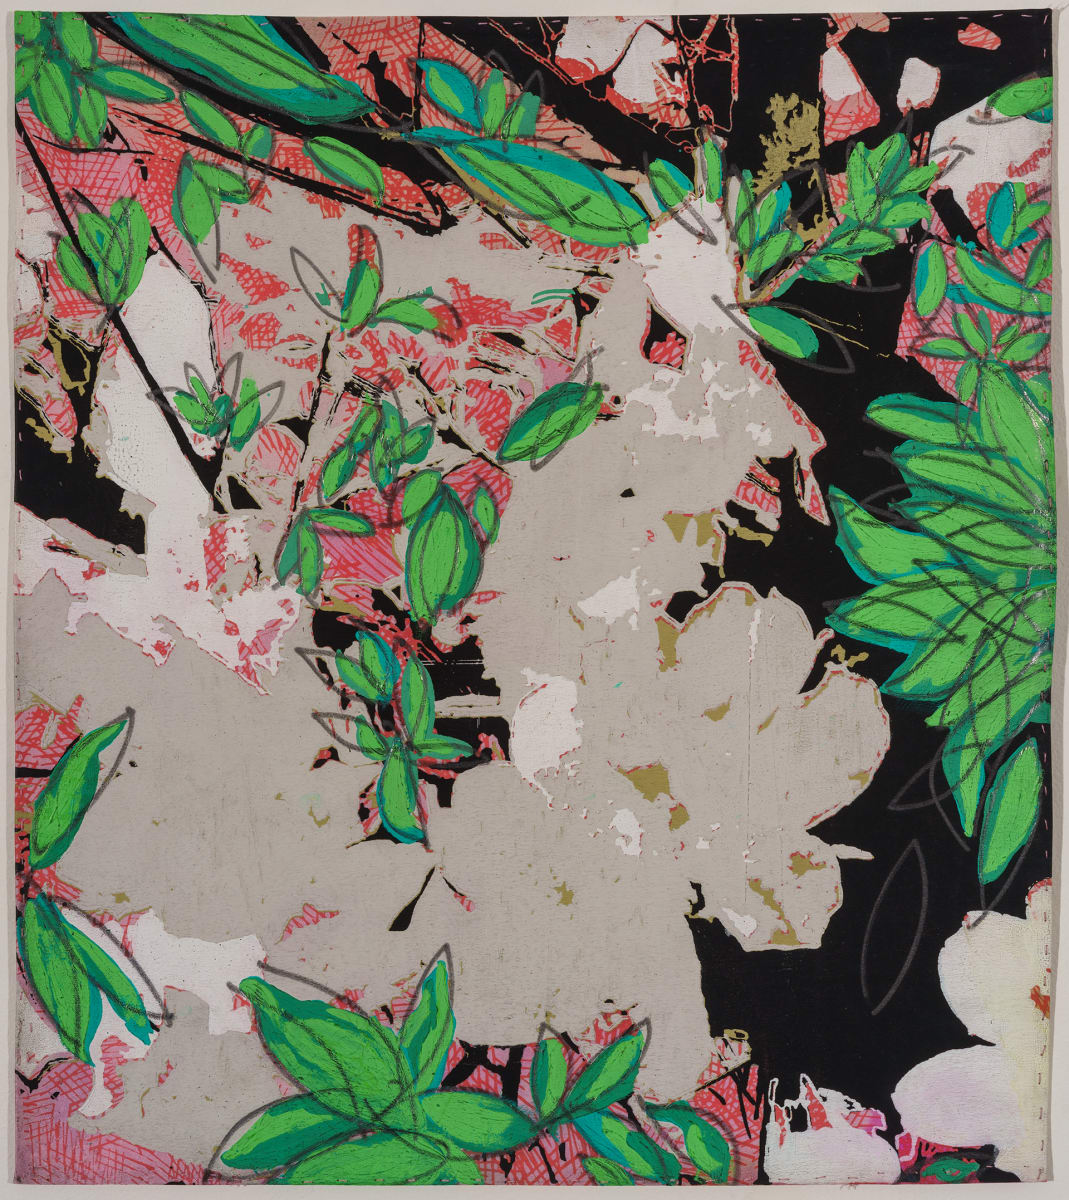 Azalea 5 by Emma Treadwell  Image: Multi-layered Silk Screen Print on Silk Charmeuse. Before printing, the silk is painted with thickened and thinned dyes. Each printed color represents one layer. Each layer requires one screen. This print uses 7 screens. The edges are hand stitched.